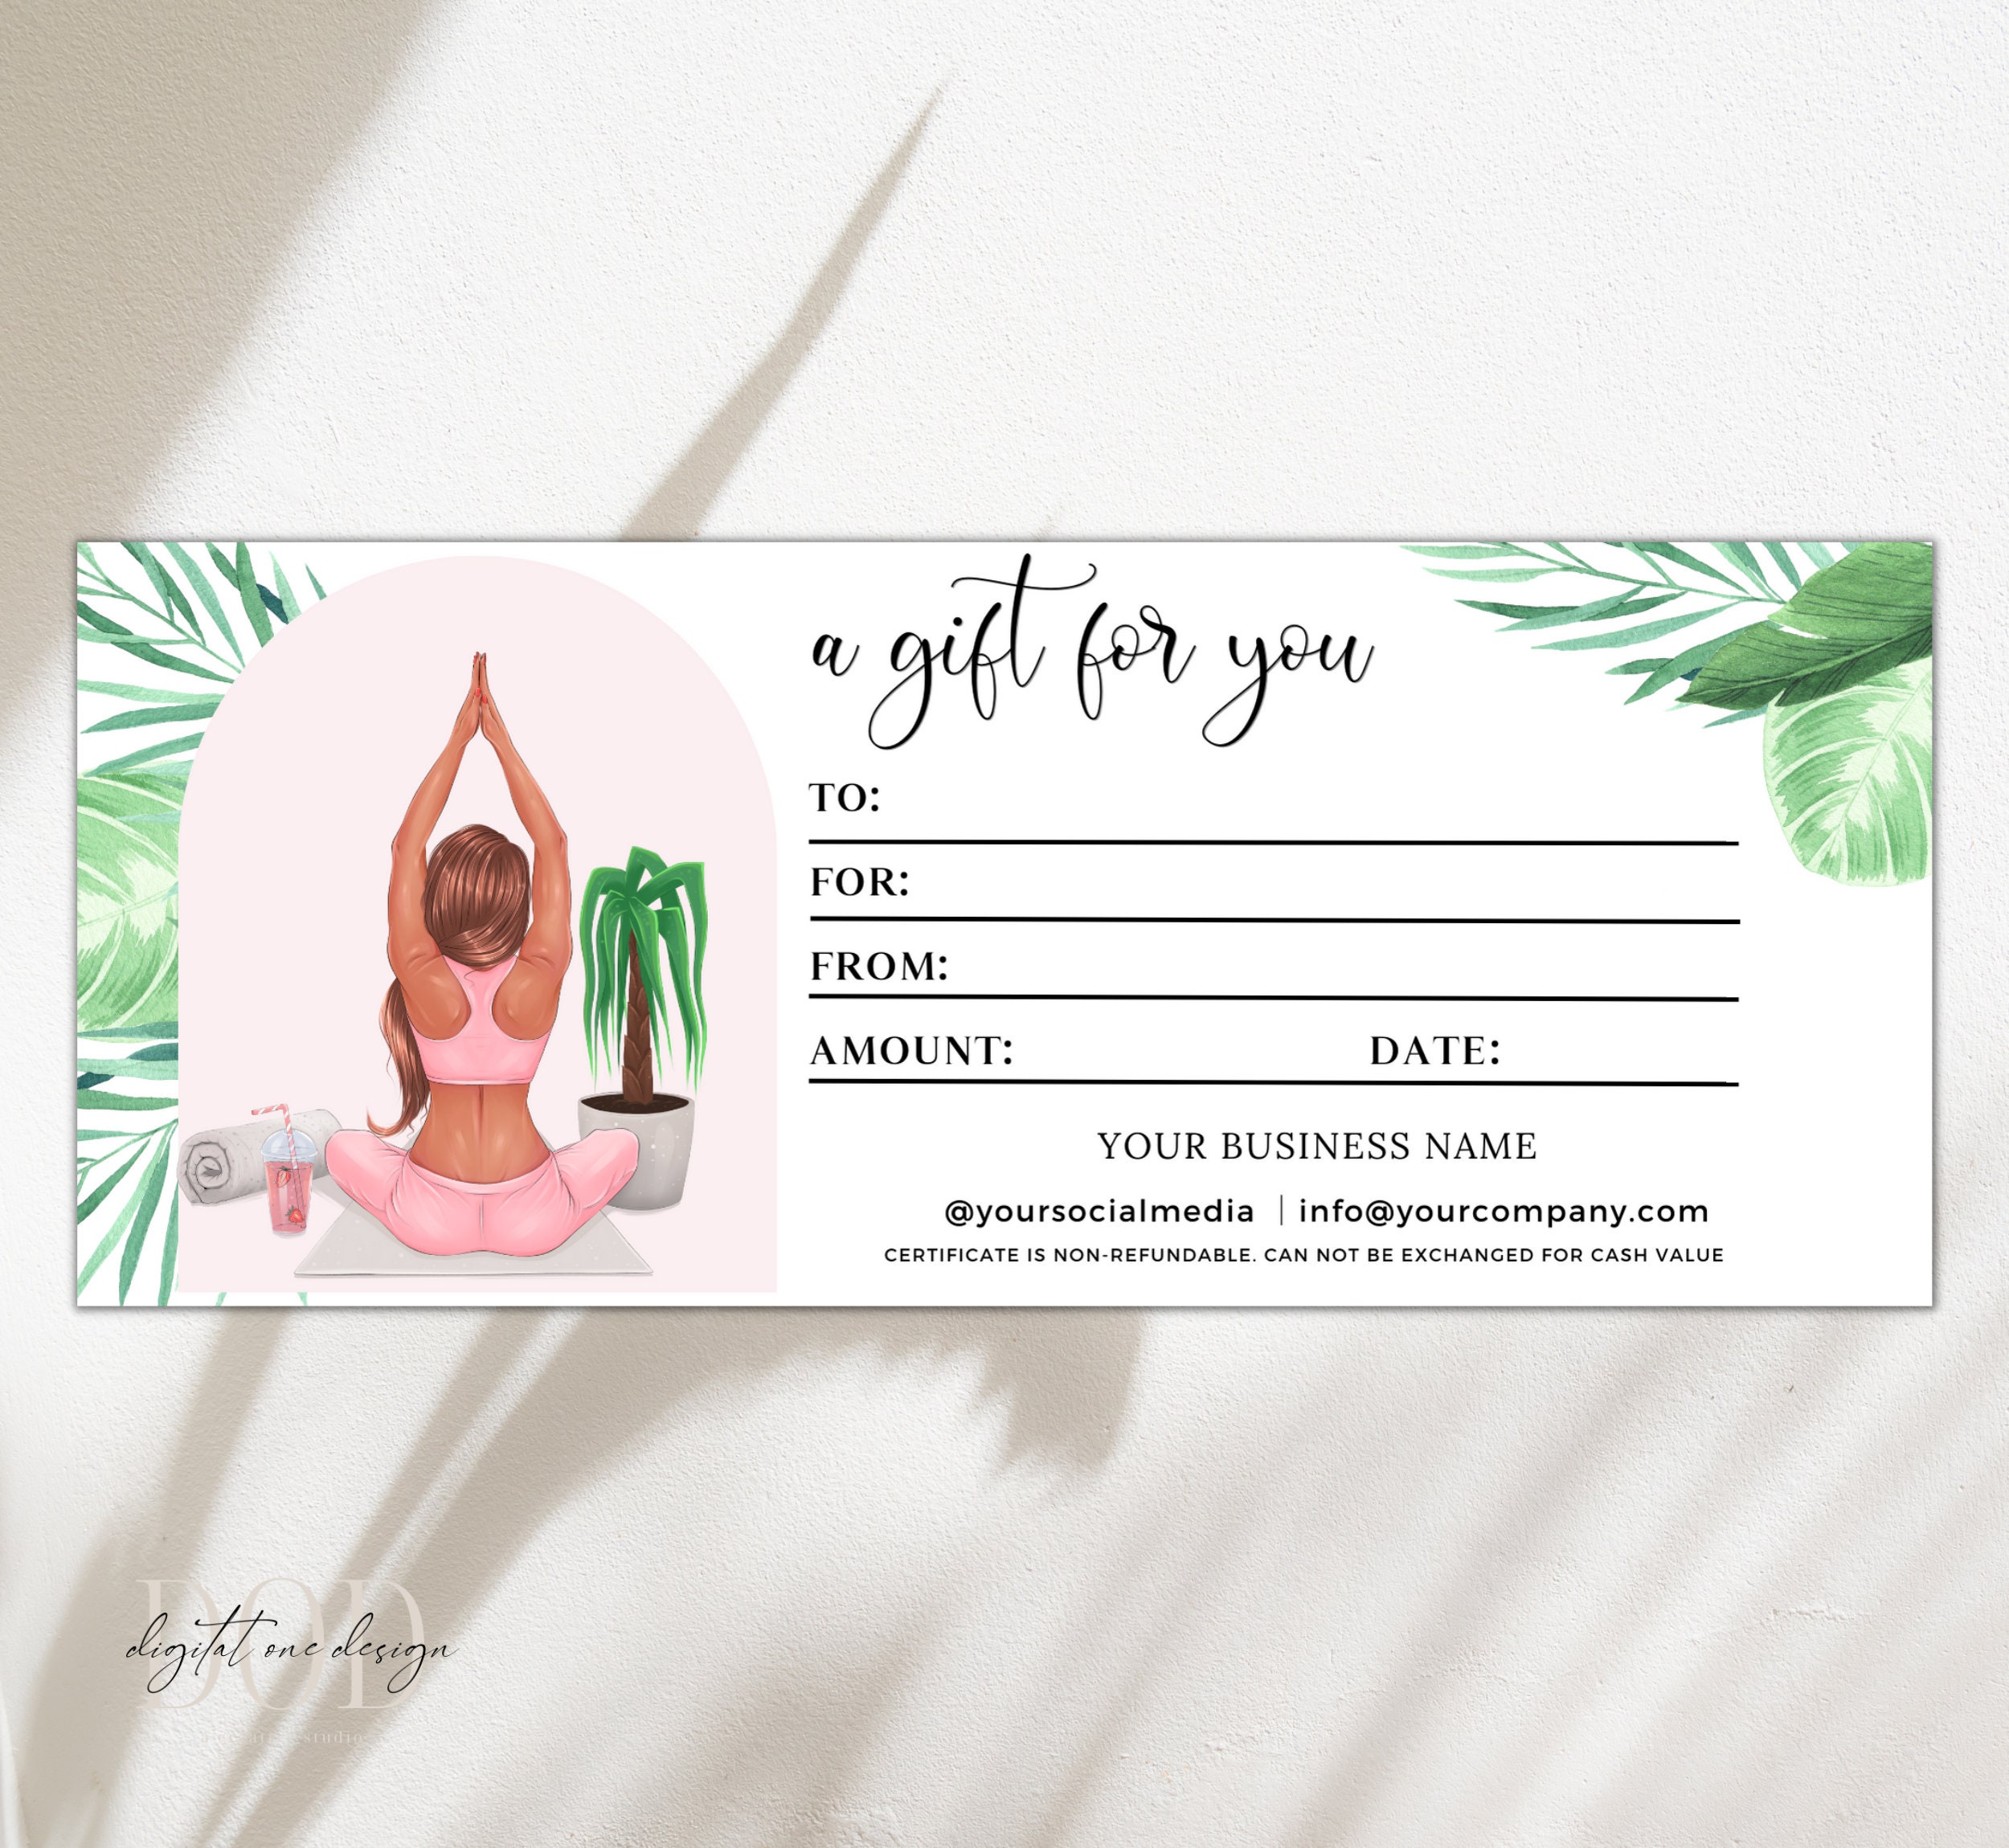 Yoga Gift Certificate Template, Fitness Gift Voucher, A Gift for You  Fitness Voucher, Healthy Life Style, Editable and Printable Gift Coupon 